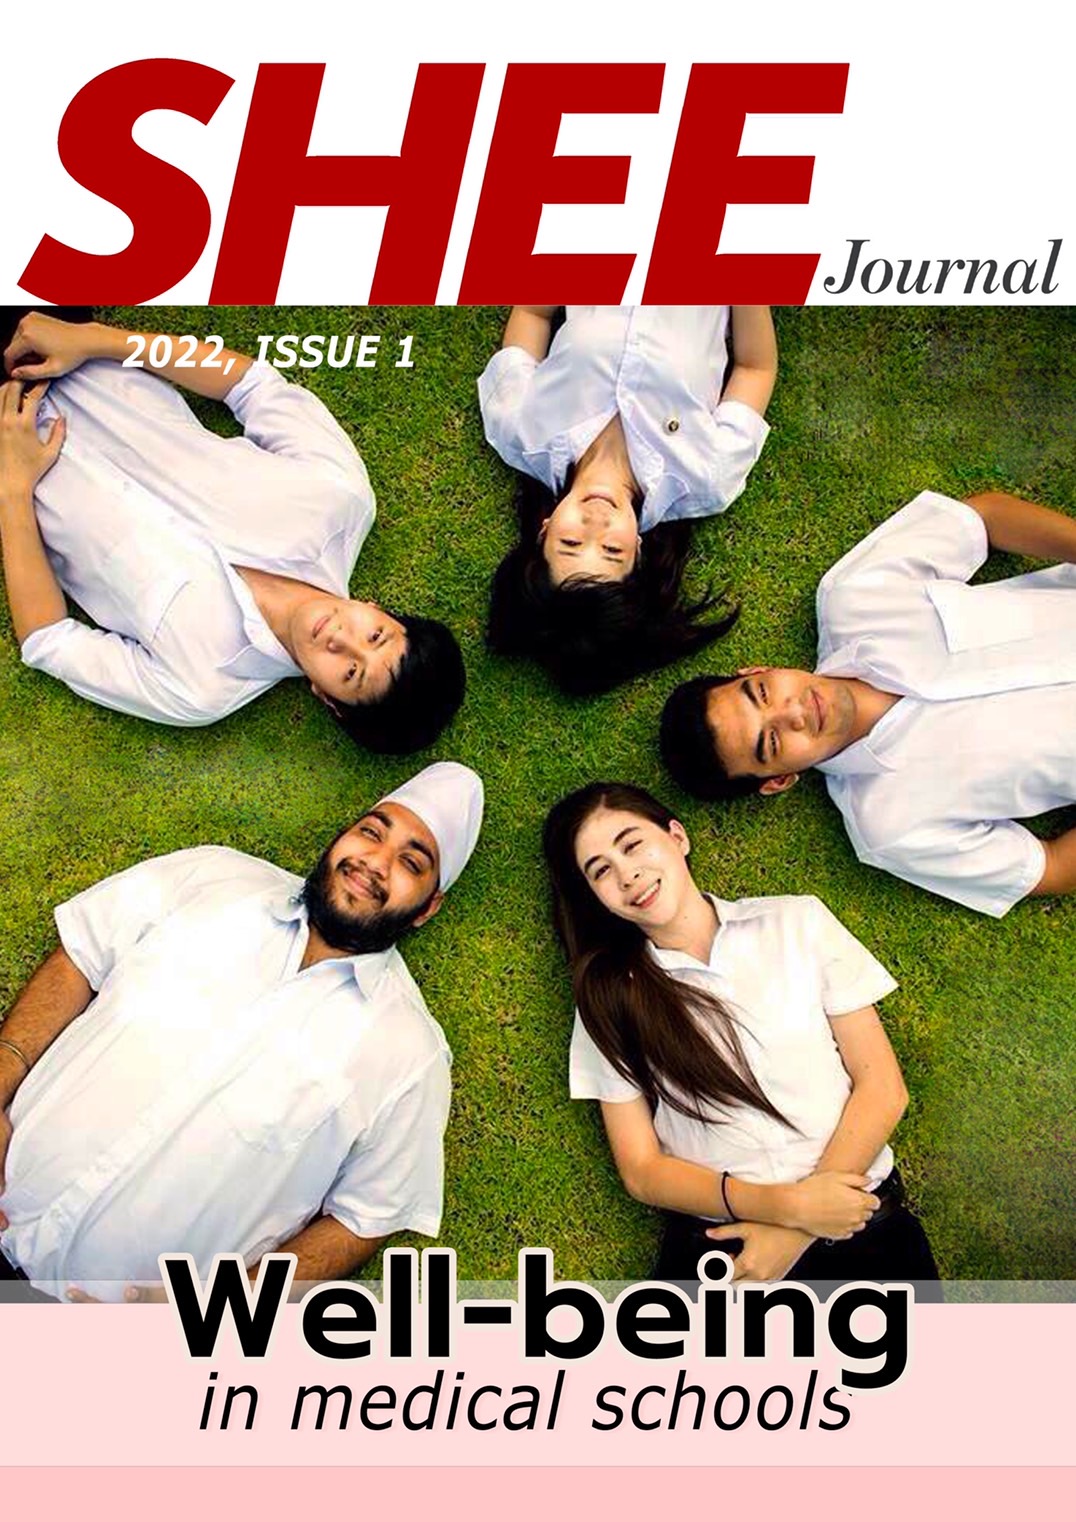 Journal Issue 1, 2022 เรื่อง Well-being in medical schools